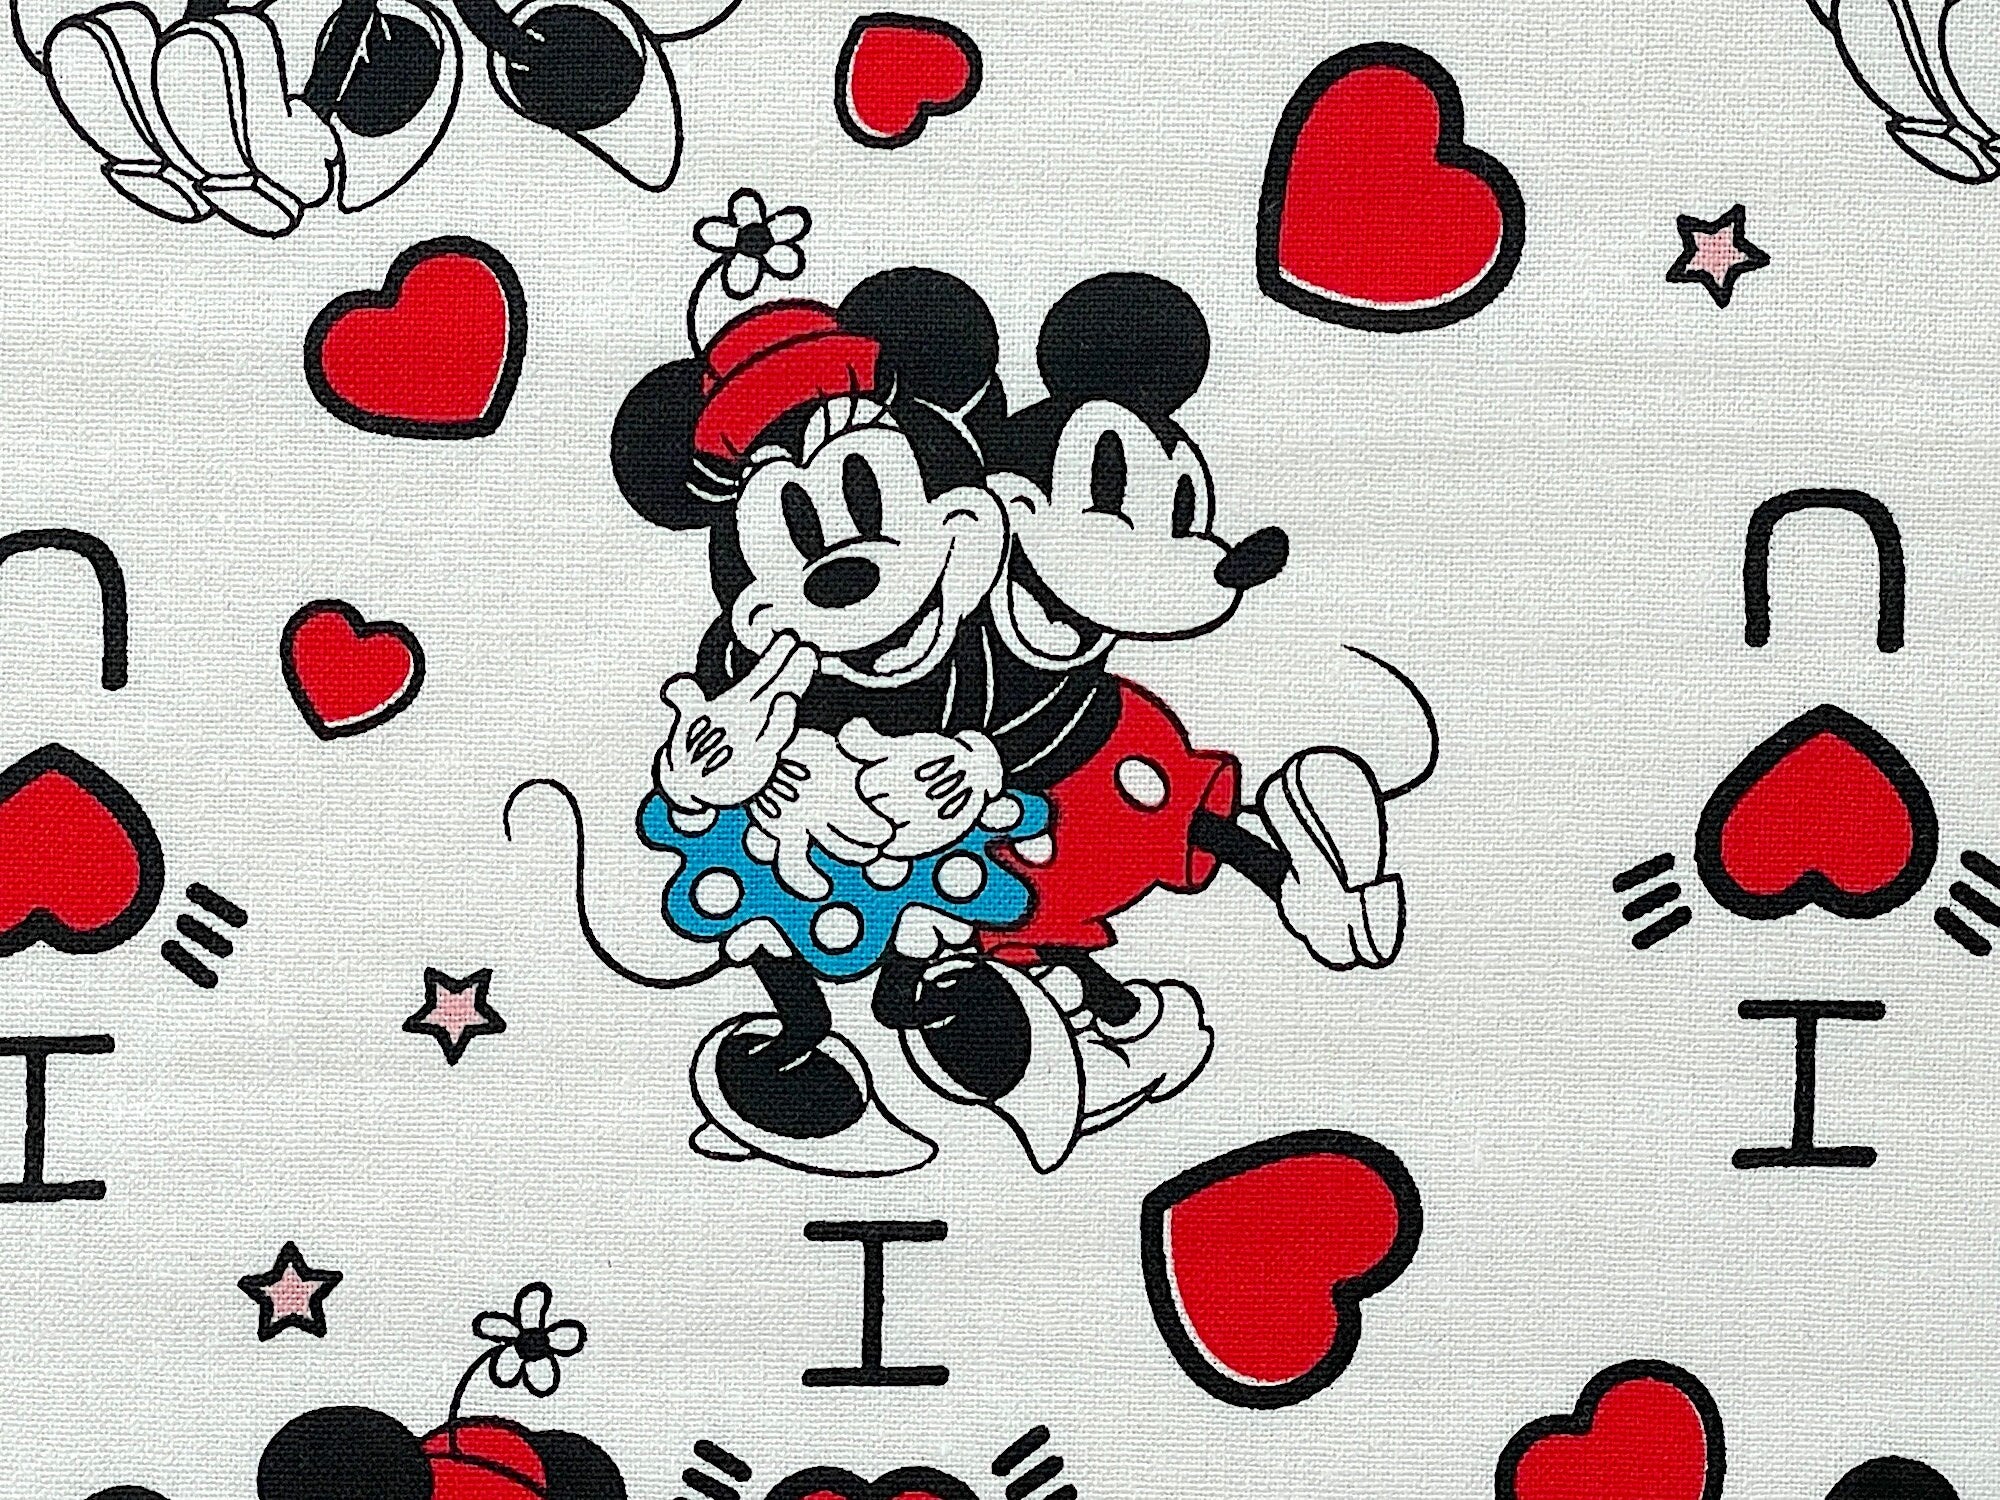 Close up of Mickey and Minnie Mouse.